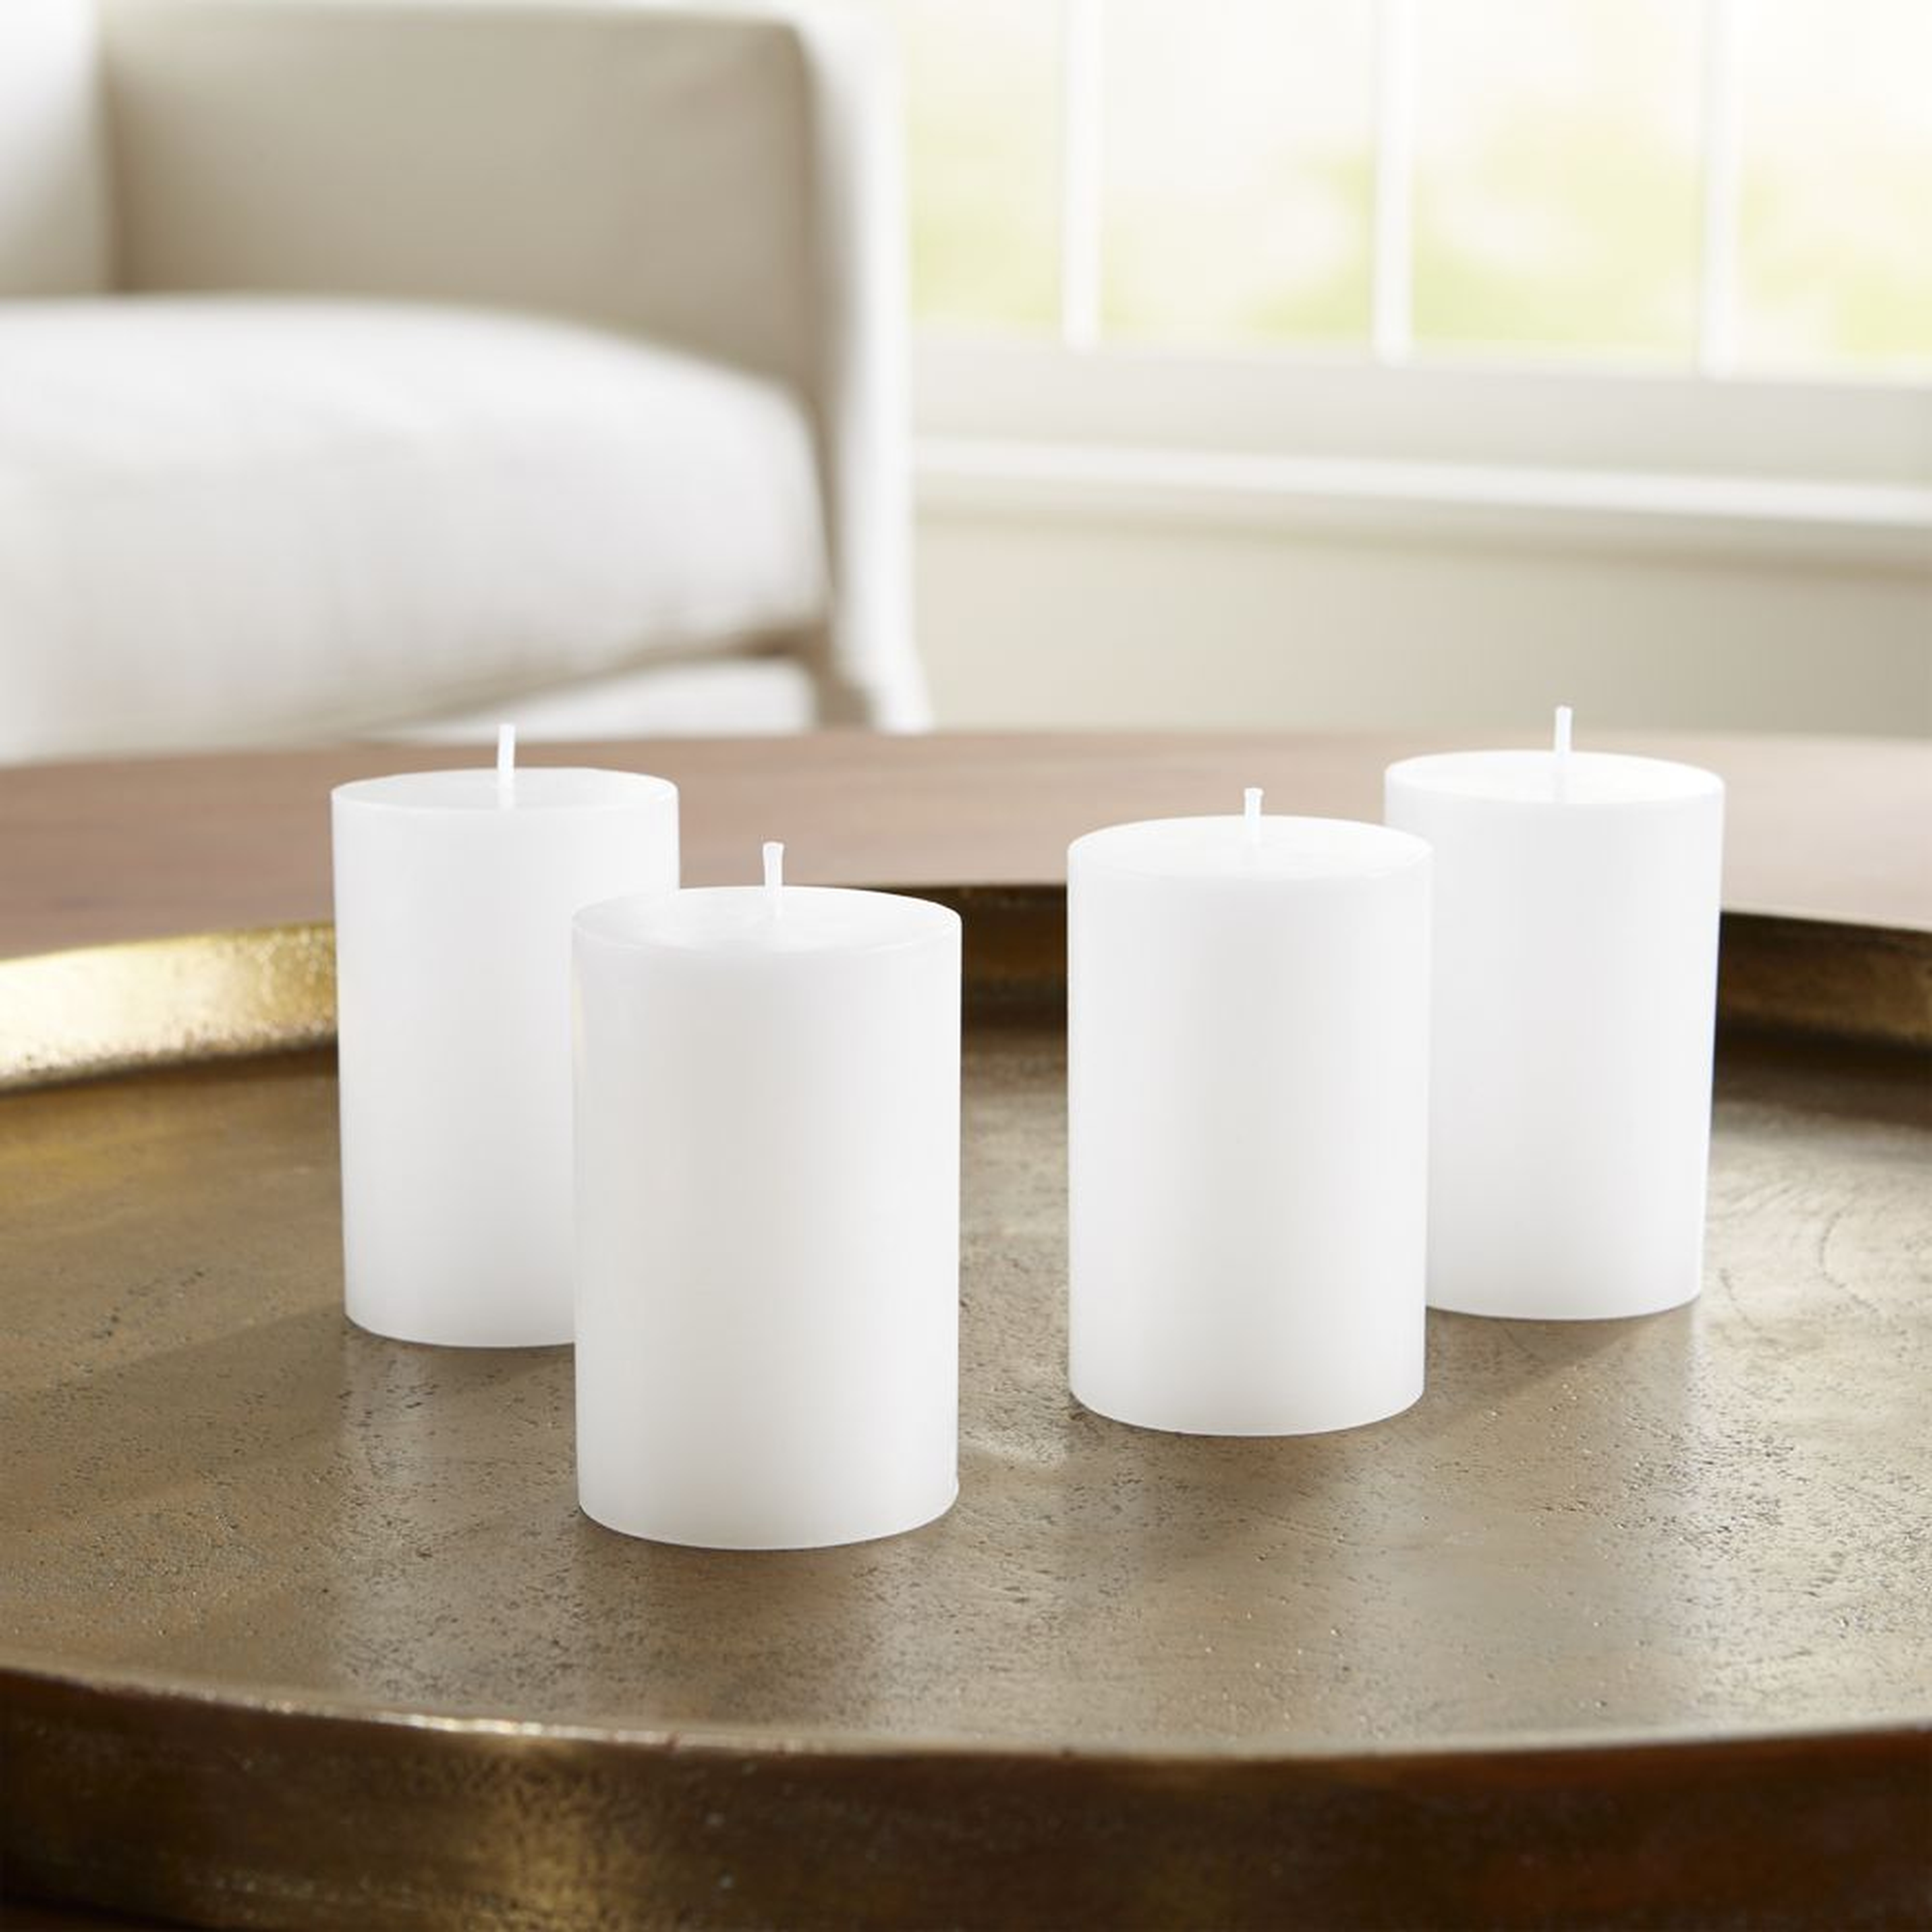 2"x3" White Pillar Candles, Set of 4 - Crate and Barrel